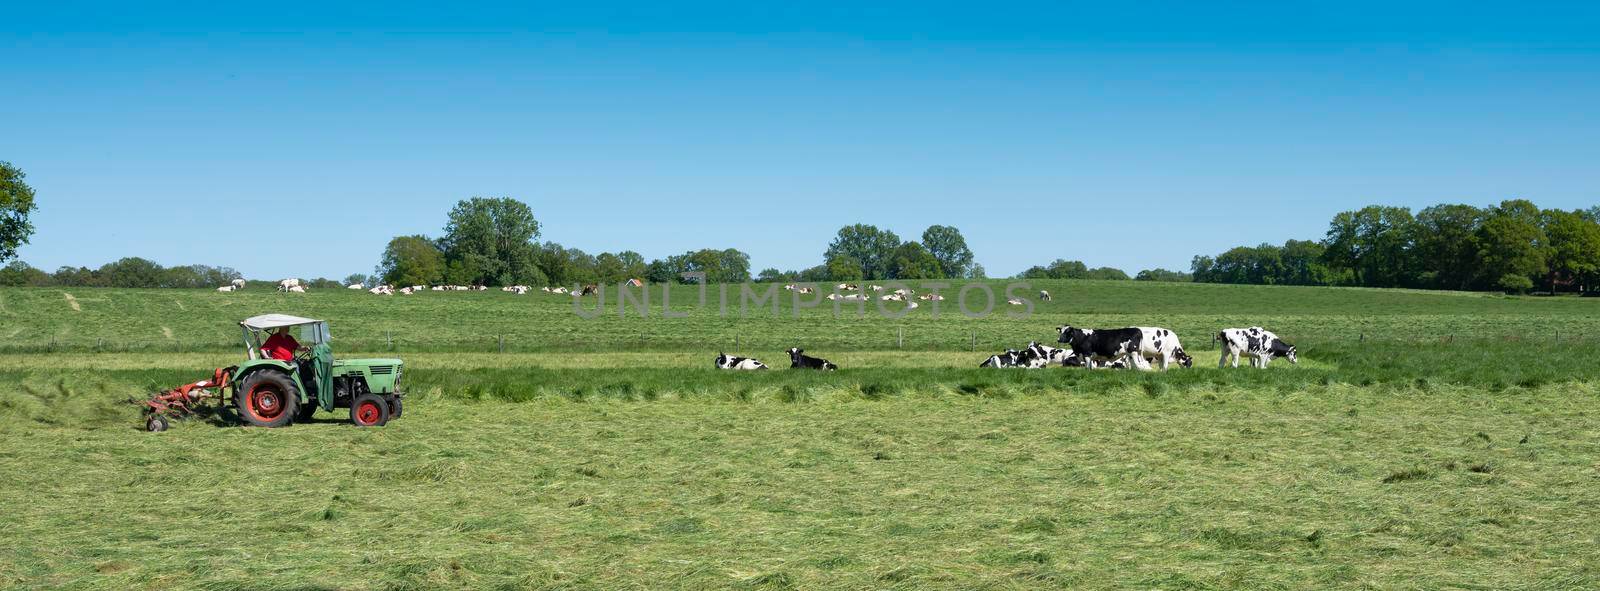 farmer mows grass near spotted cows between oldenzaal and enschede in dutch province of overijssel on sunny summer day under blue sky